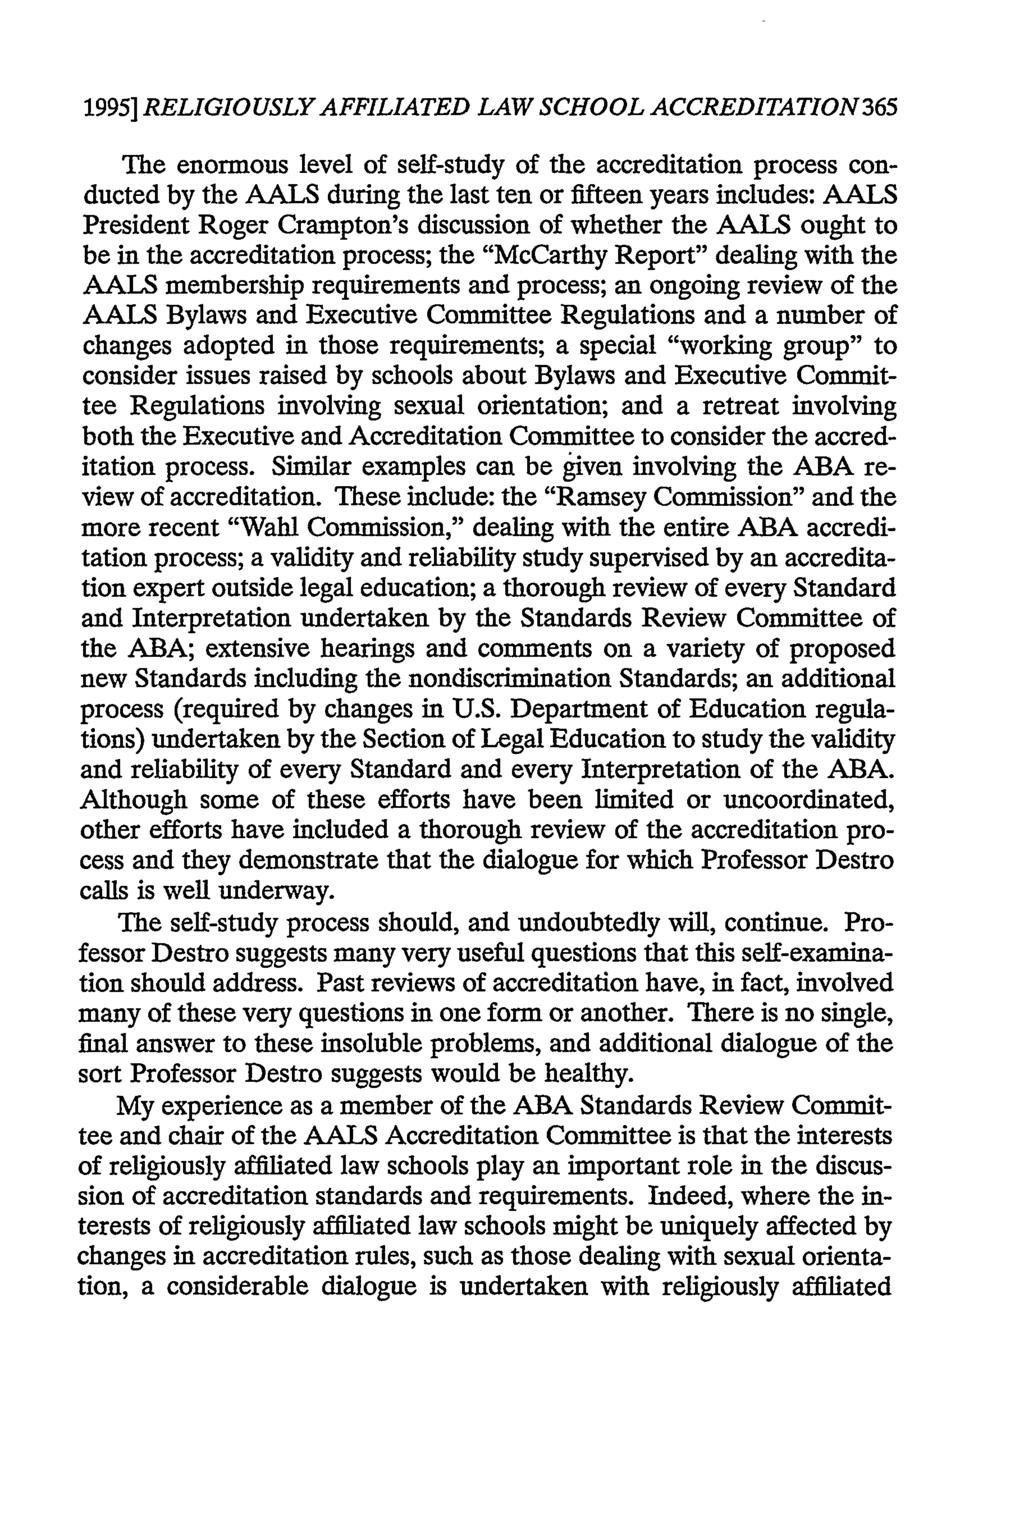 1995] RELIGIOUSLY AFFILIATED LAW SCHOOL ACCREDITATION 365 The enormous level of self-study of the accreditation process conducted by the AALS during the last ten or fifteen years includes: AALS